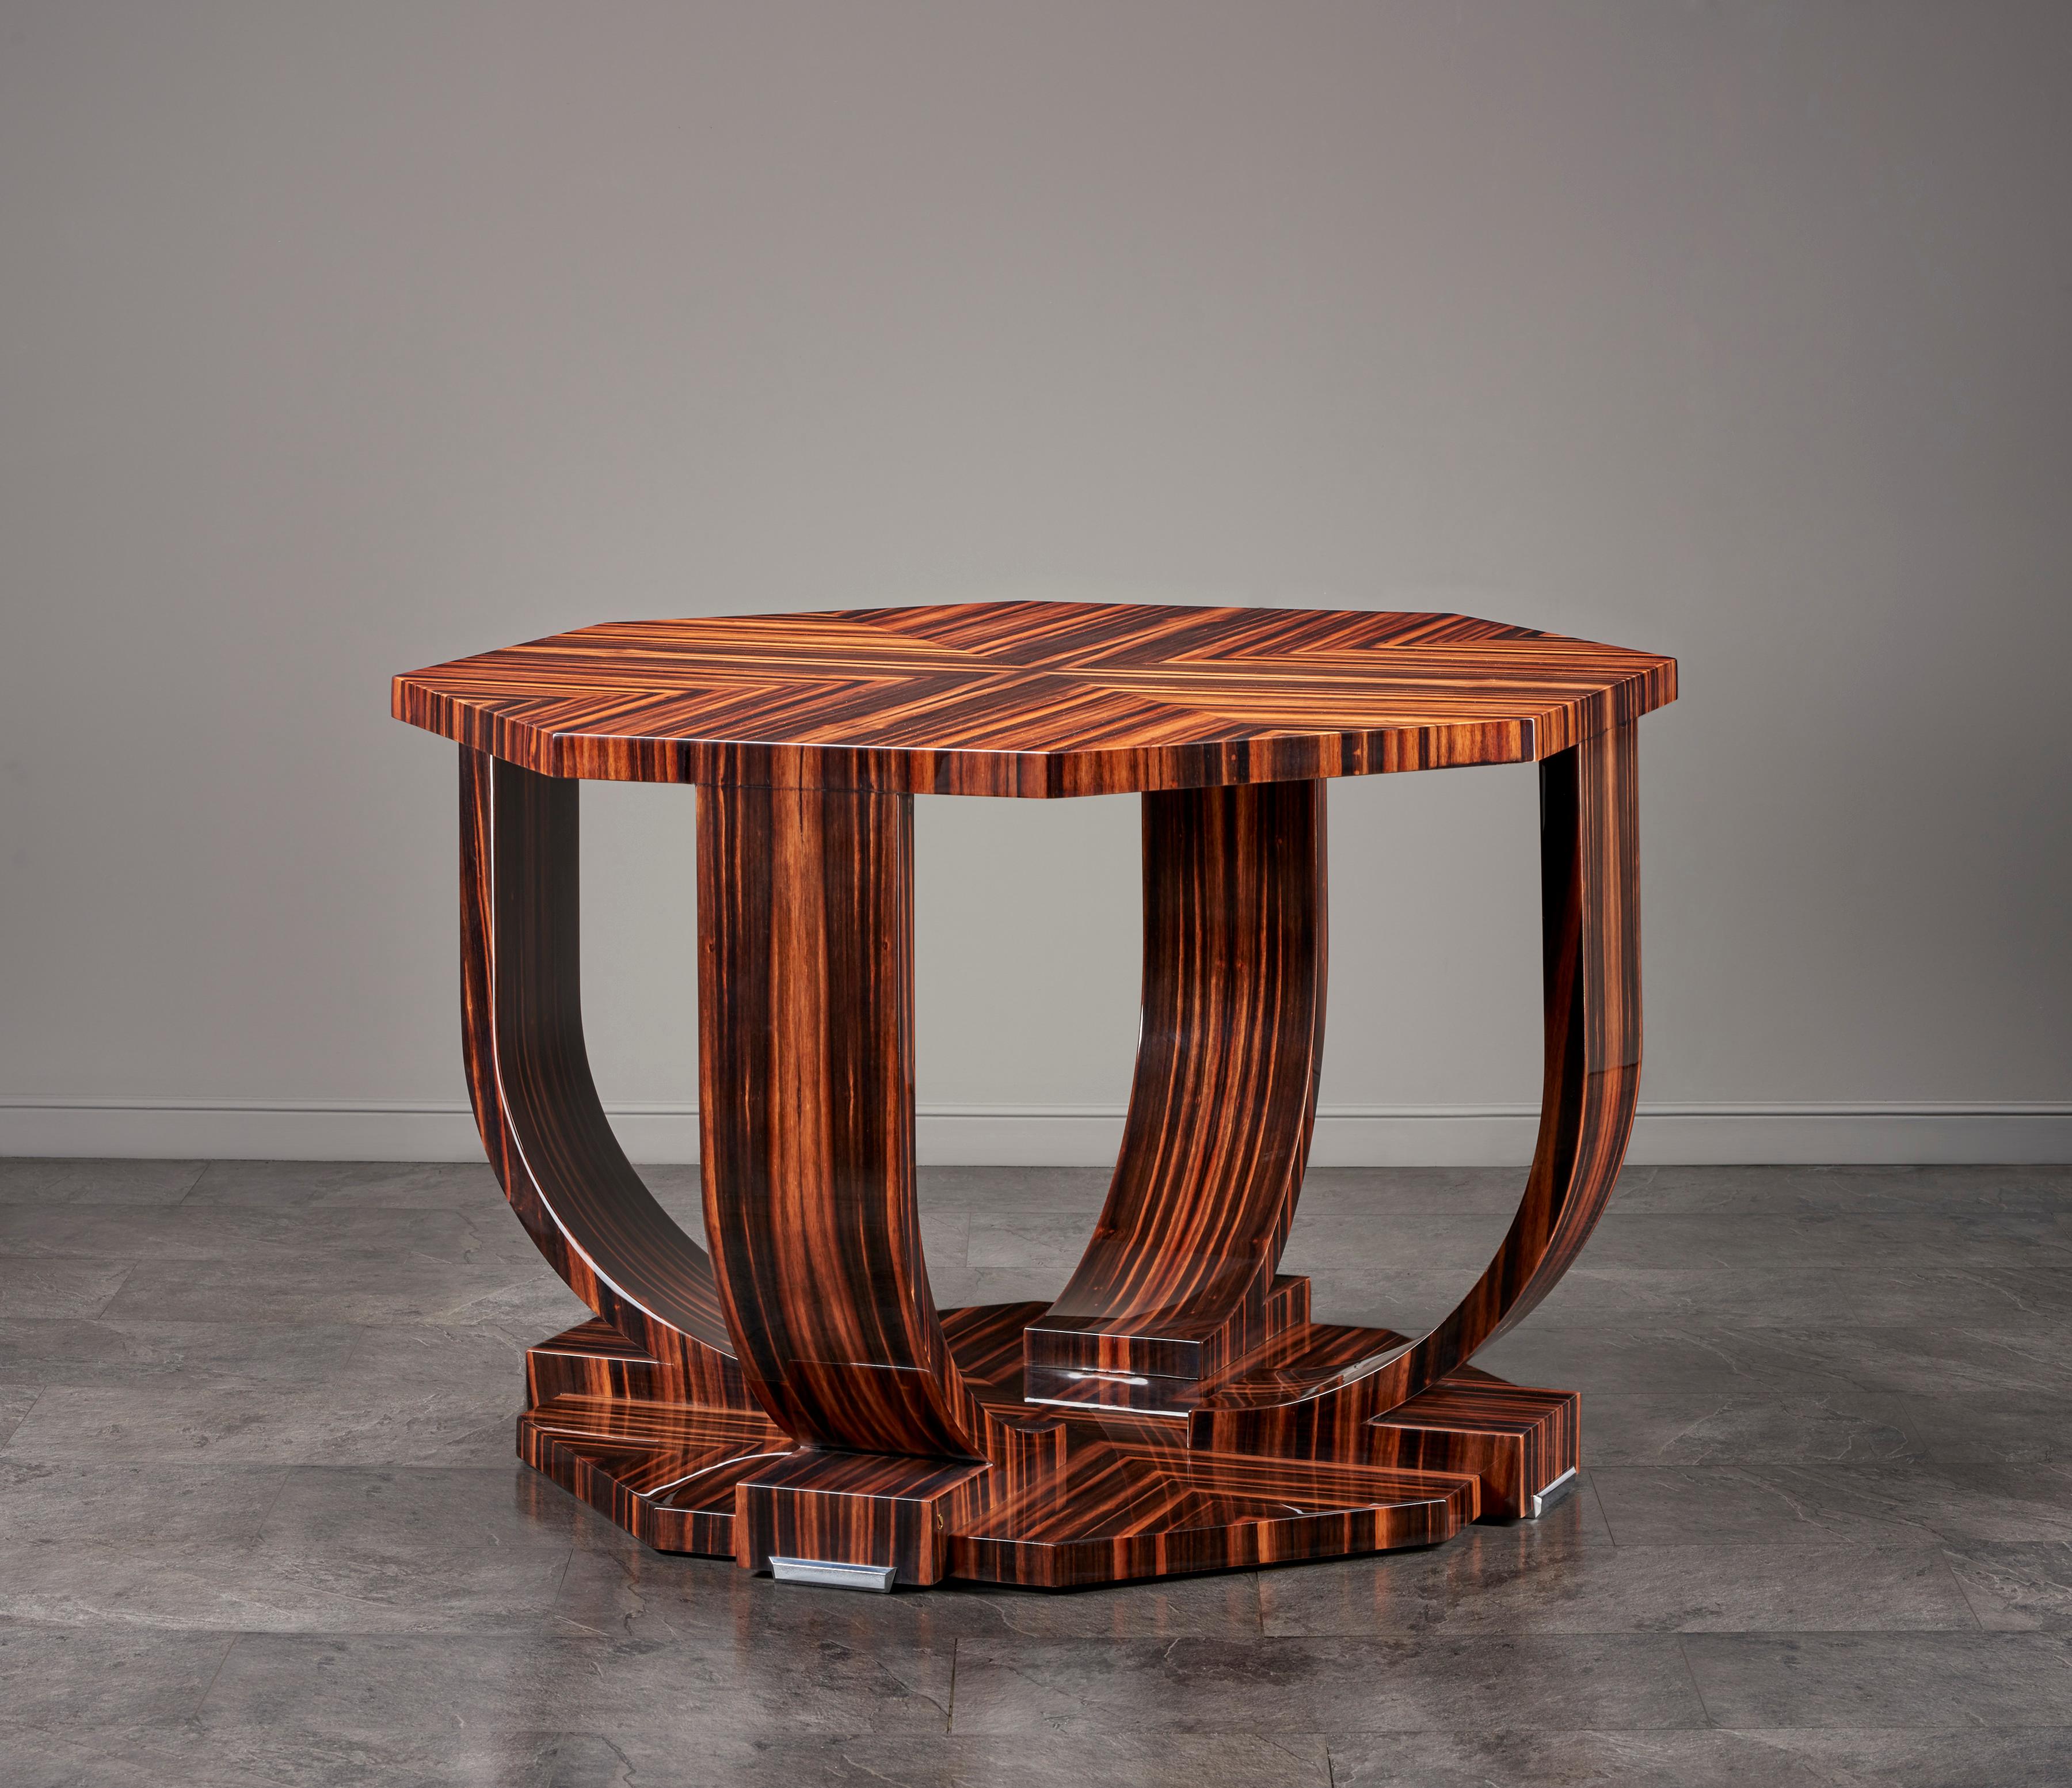 SIGNO FOYER TABLE

A signature piece that will draw attention, it belongs to a lush entrance hall or serves as the centerpiece of a salon. Its unique octagonal shape is inspired by ancient art and is the characteristic of aristocracy. The